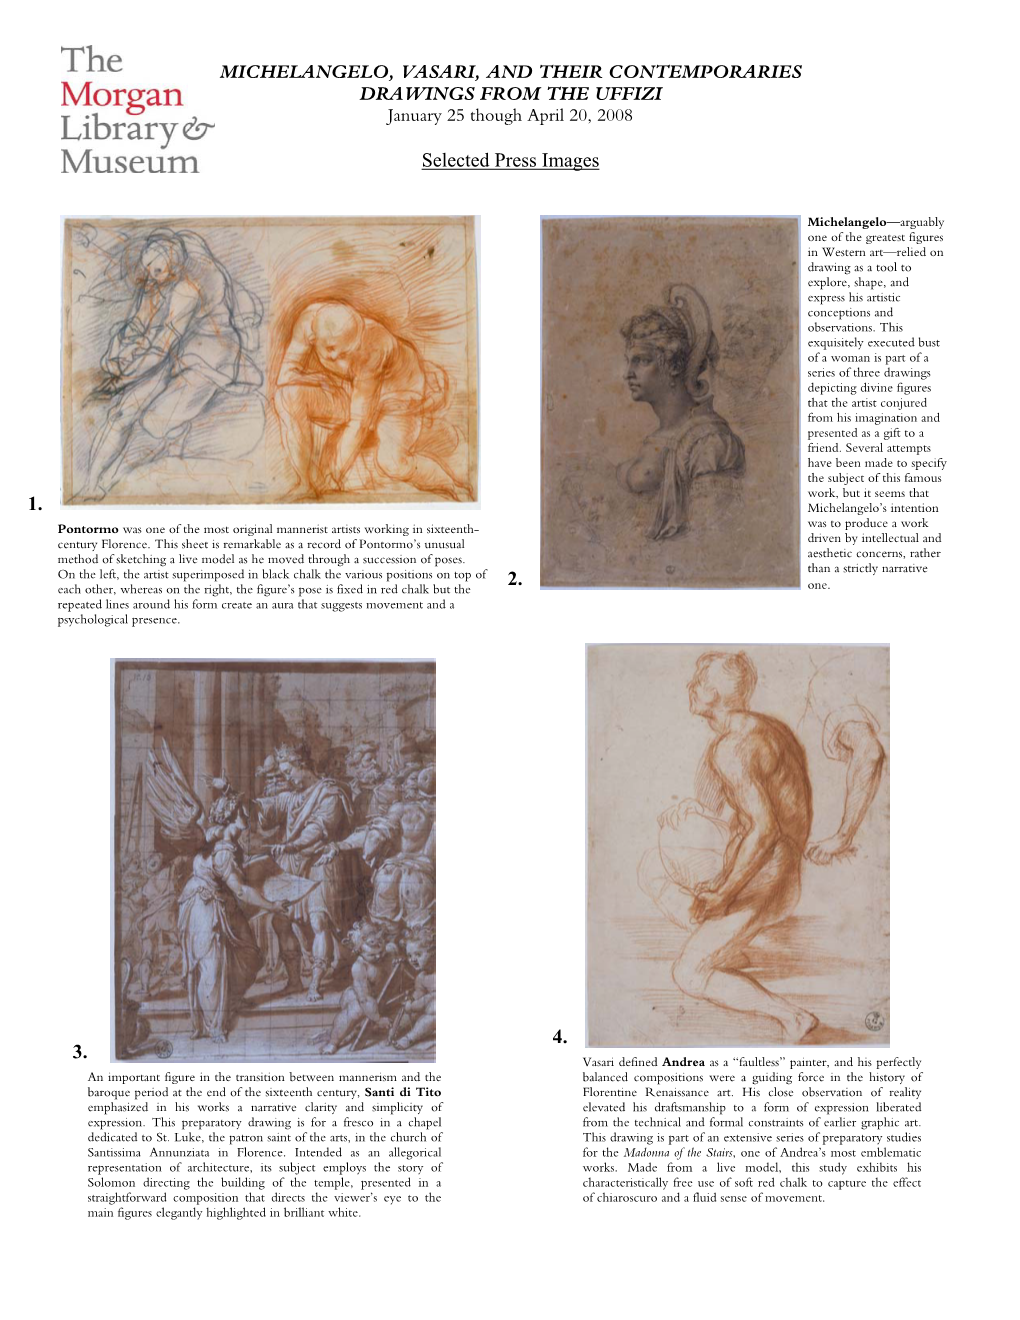 MICHELANGELO, VASARI, and THEIR CONTEMPORARIES DRAWINGS from the UFFIZI January 25 Though April 20, 2008